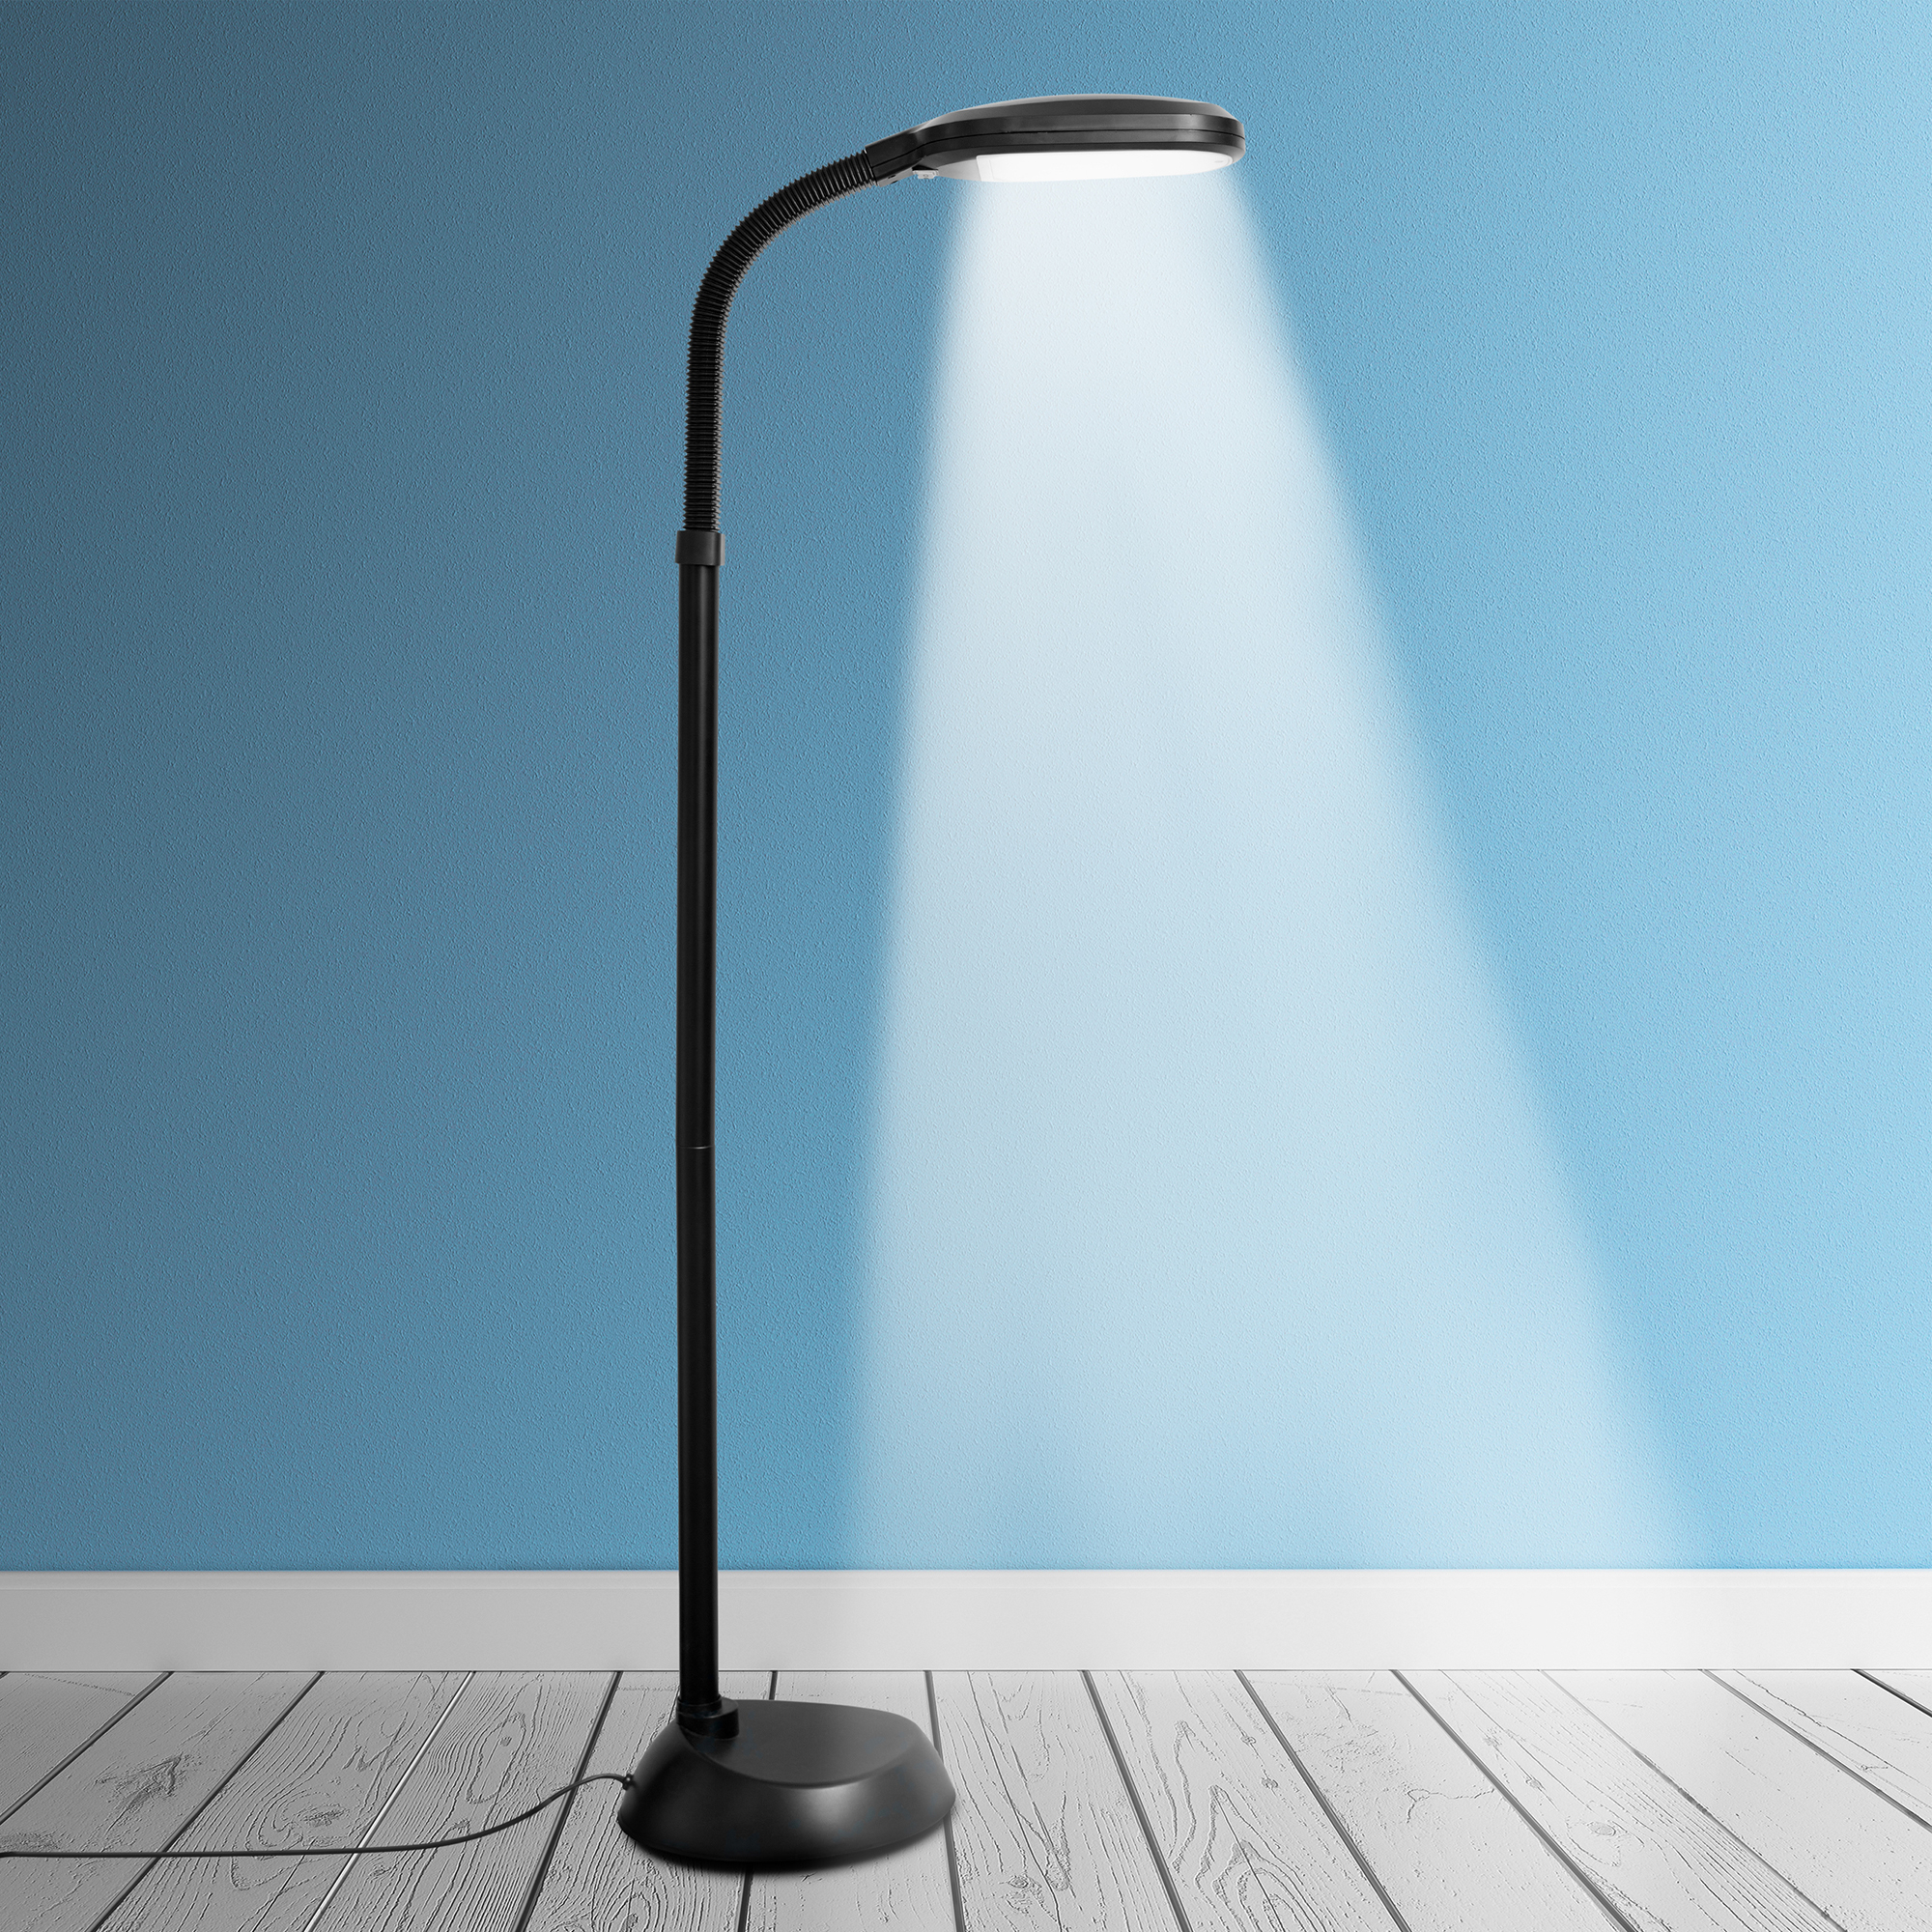 Details About Kenley Natural Daylight Floor Lamp 12w Led Dimmable Adjustable Reading Light within size 2000 X 2000